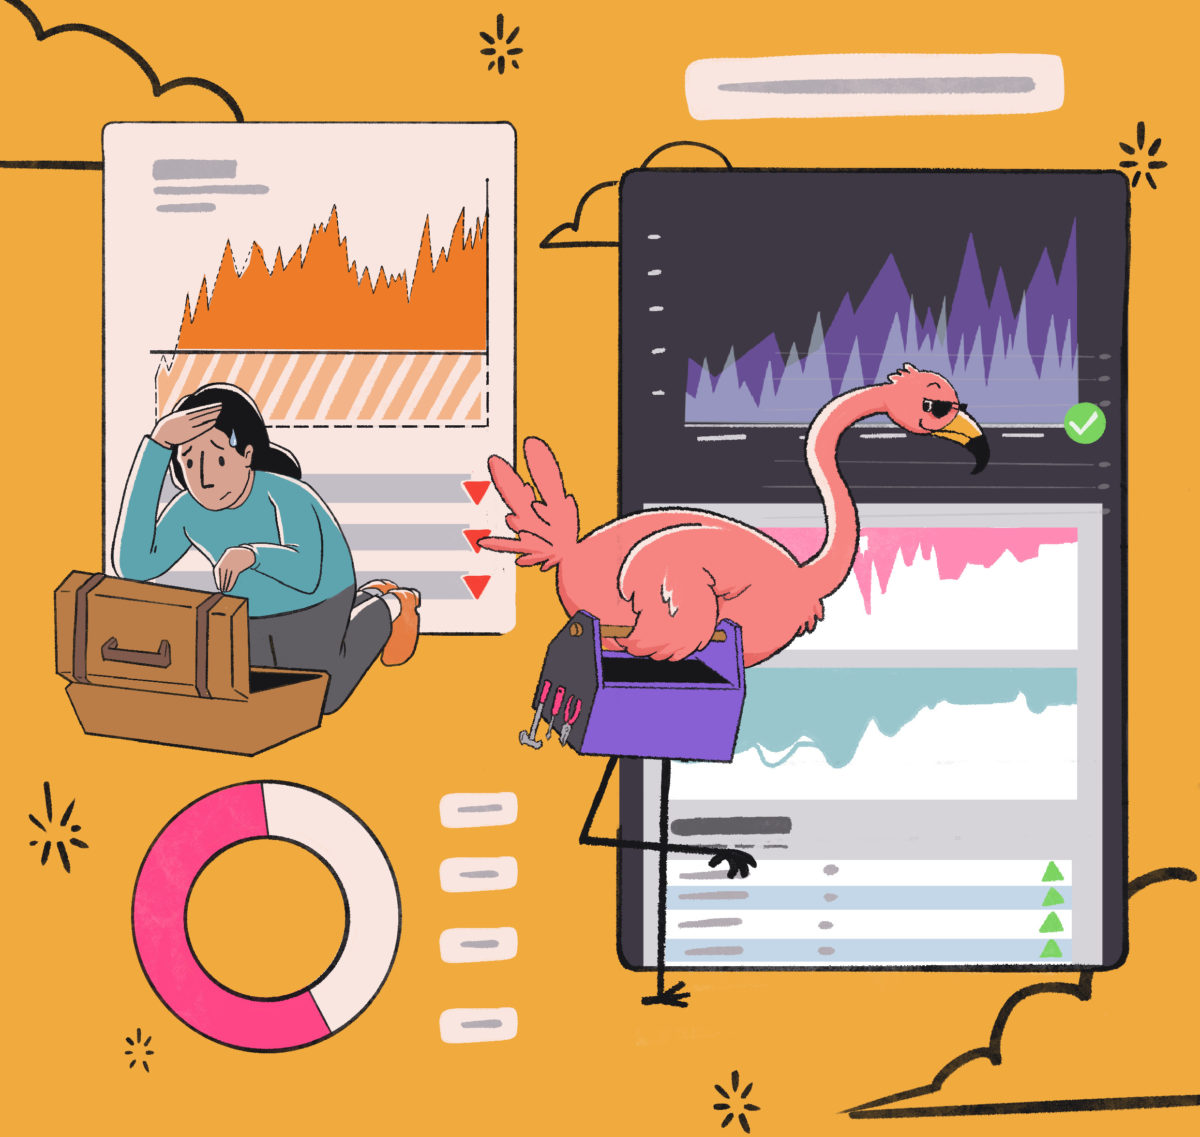 Flamingo looking at his GSC insights dashboard and wearing sunglasses because he knows the data is 100% accurate